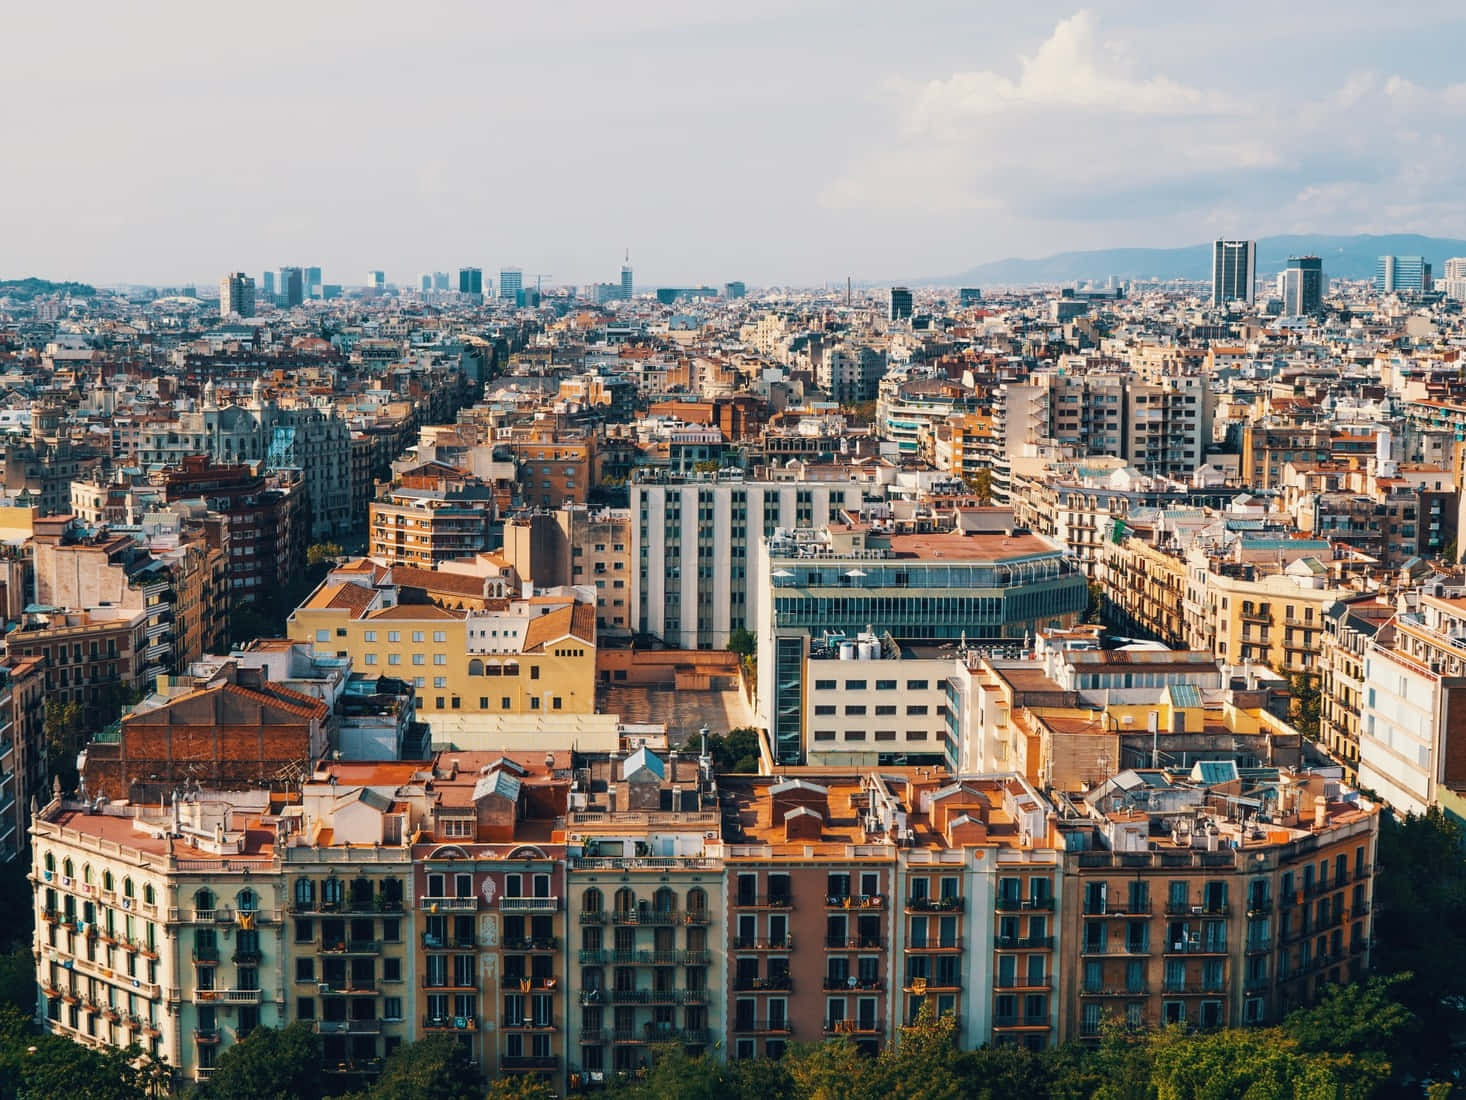 "Discovering the Beauty of Barcelona's Cityscape"